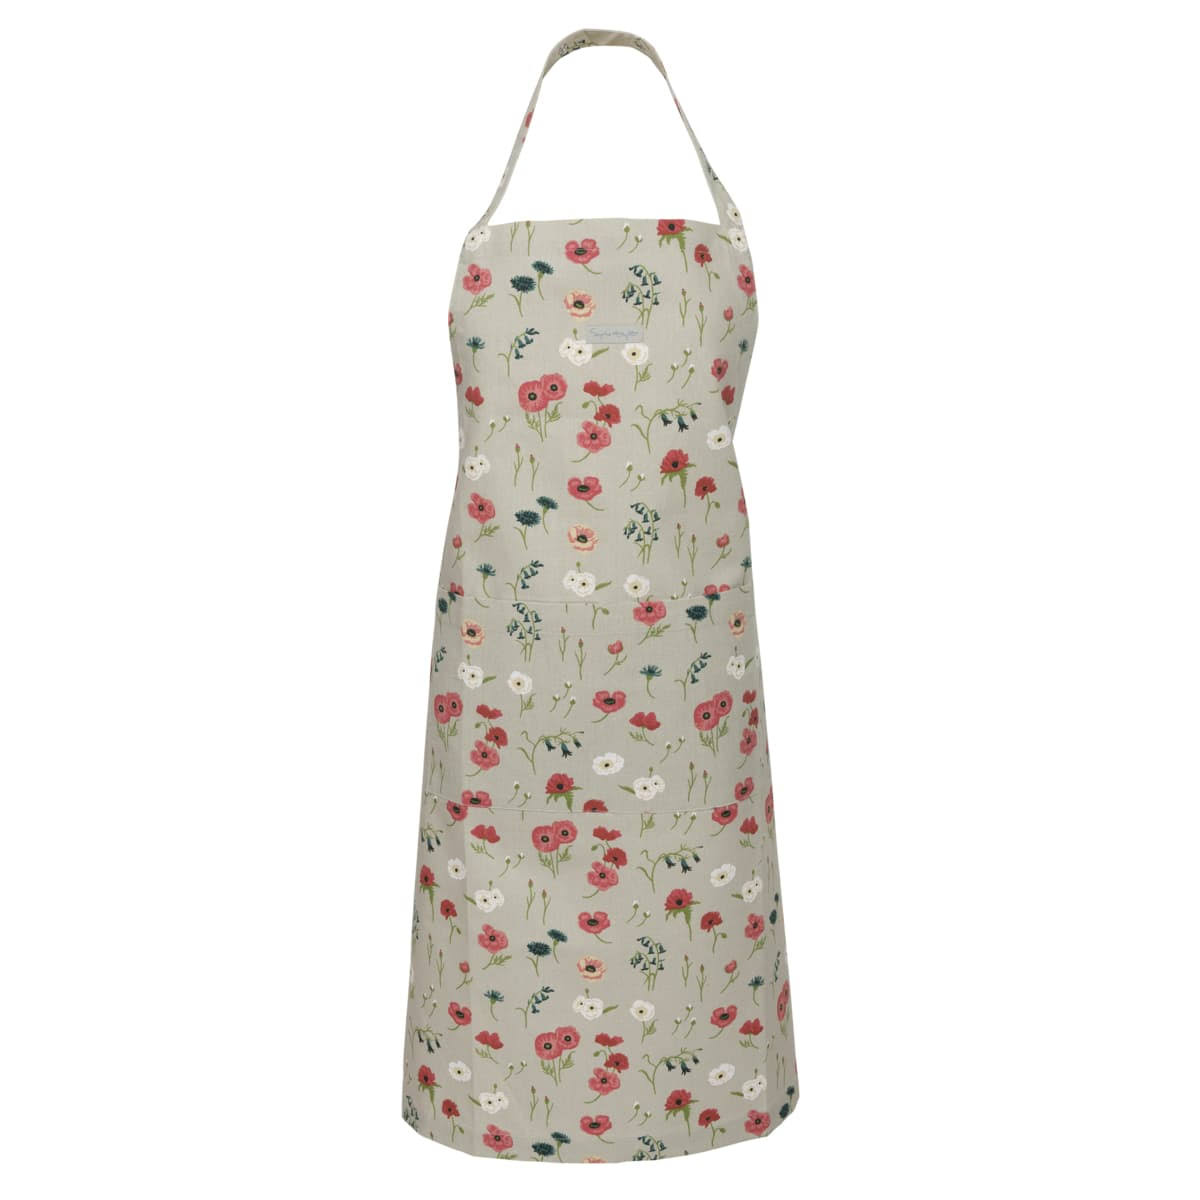 Poppy Meadow Adult Apron by Sophie Allport